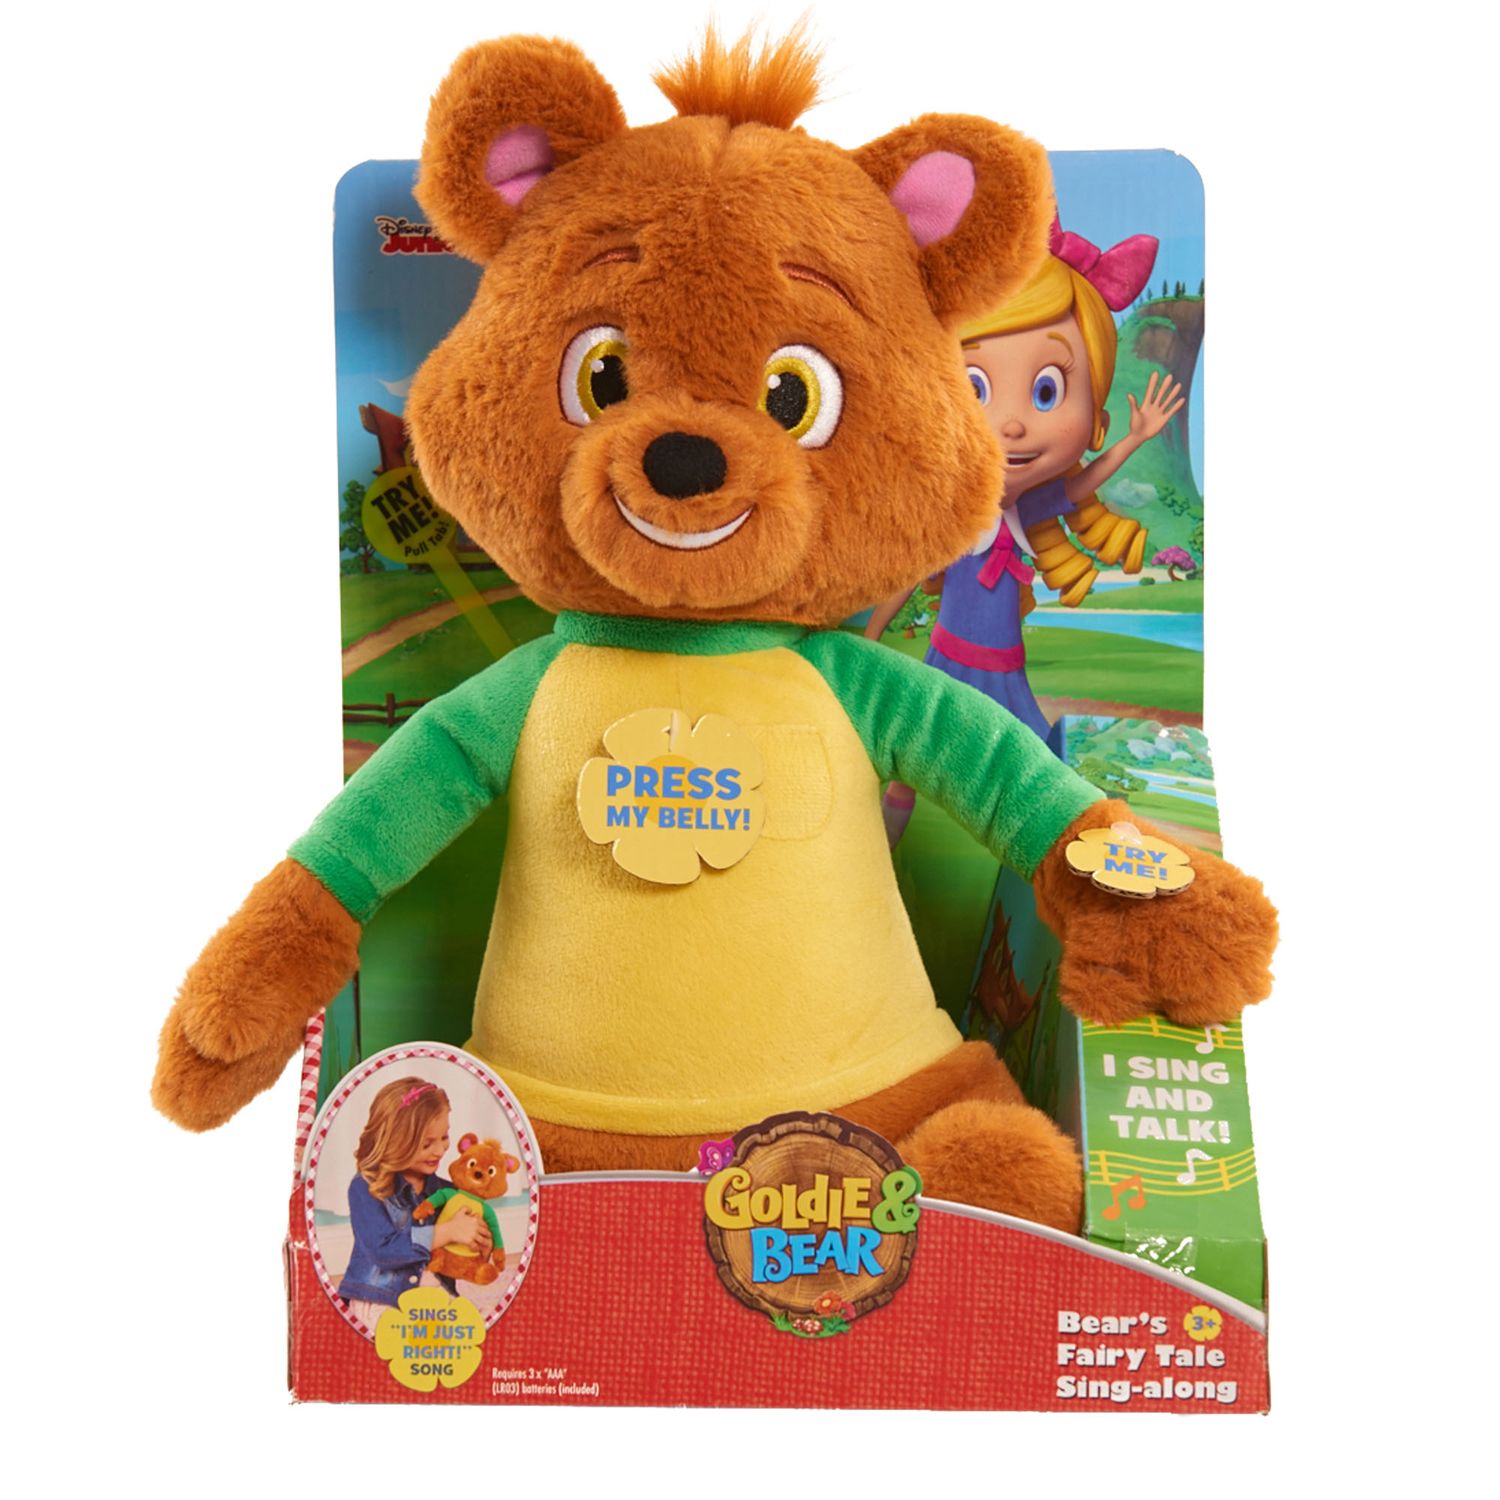 goldie and bear stuffed animals